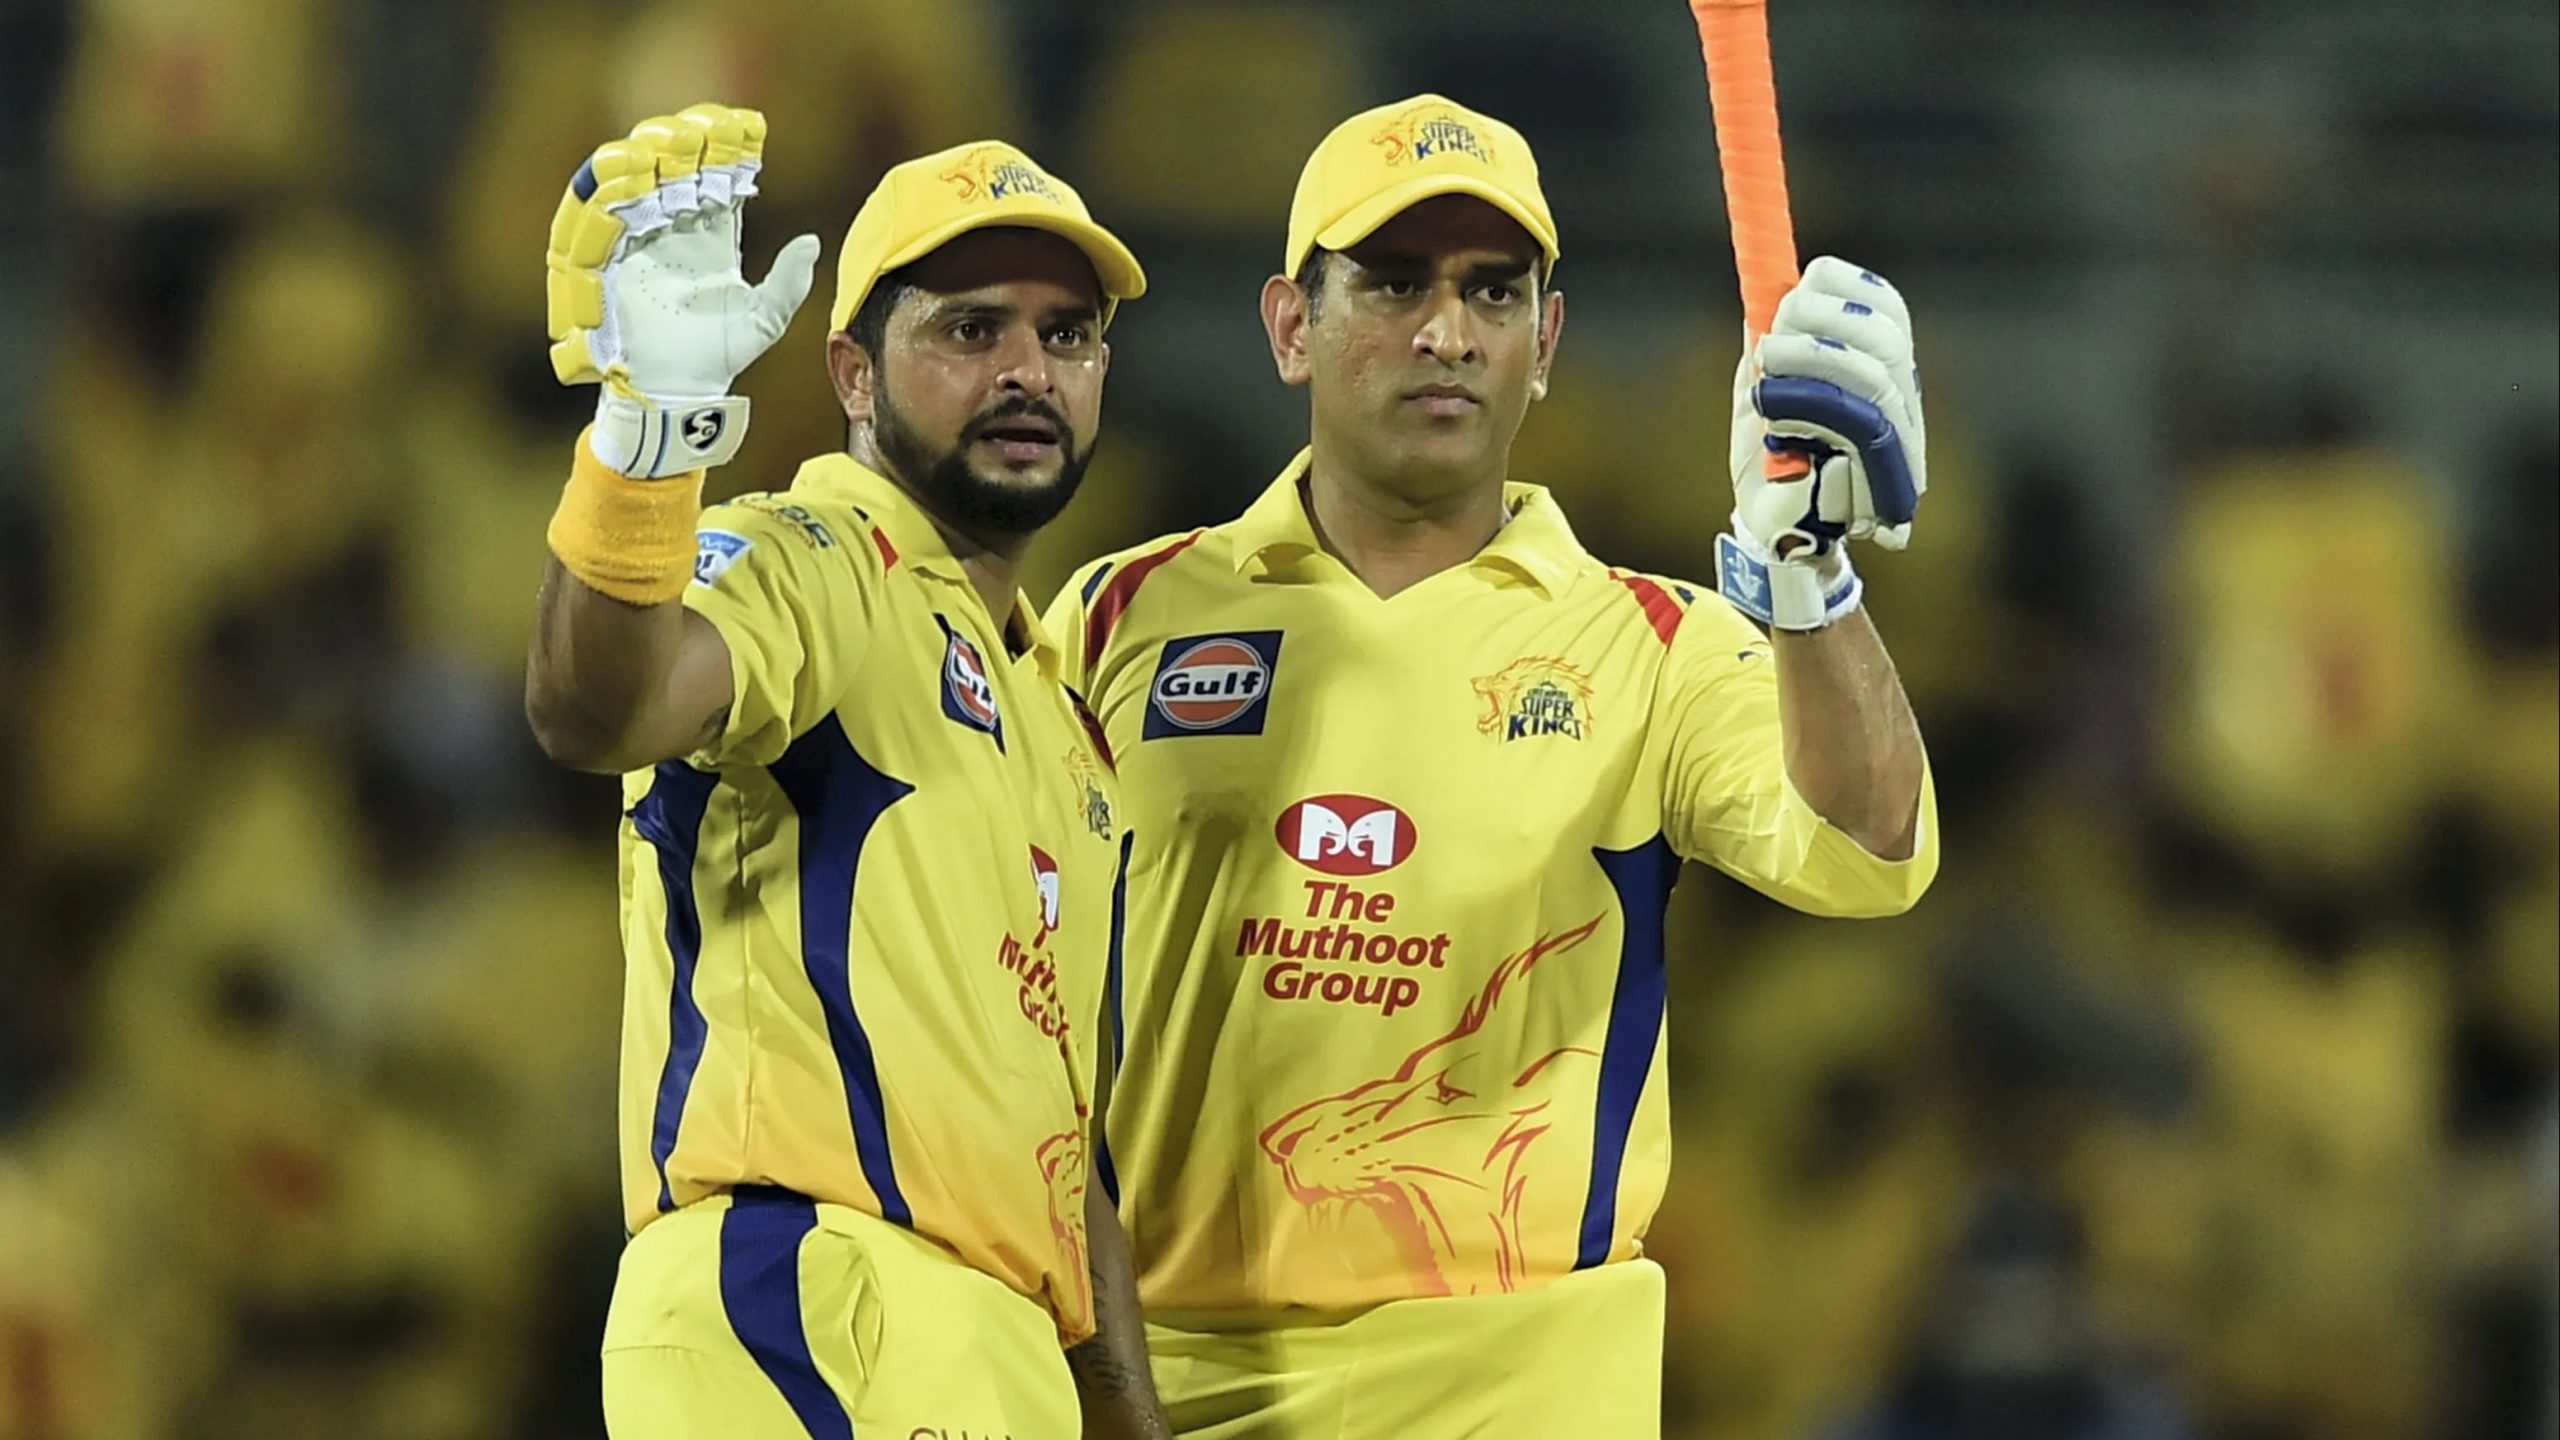 CSK owner says Suresh Raina behaved like ‘prima donna’ in UAE: Report